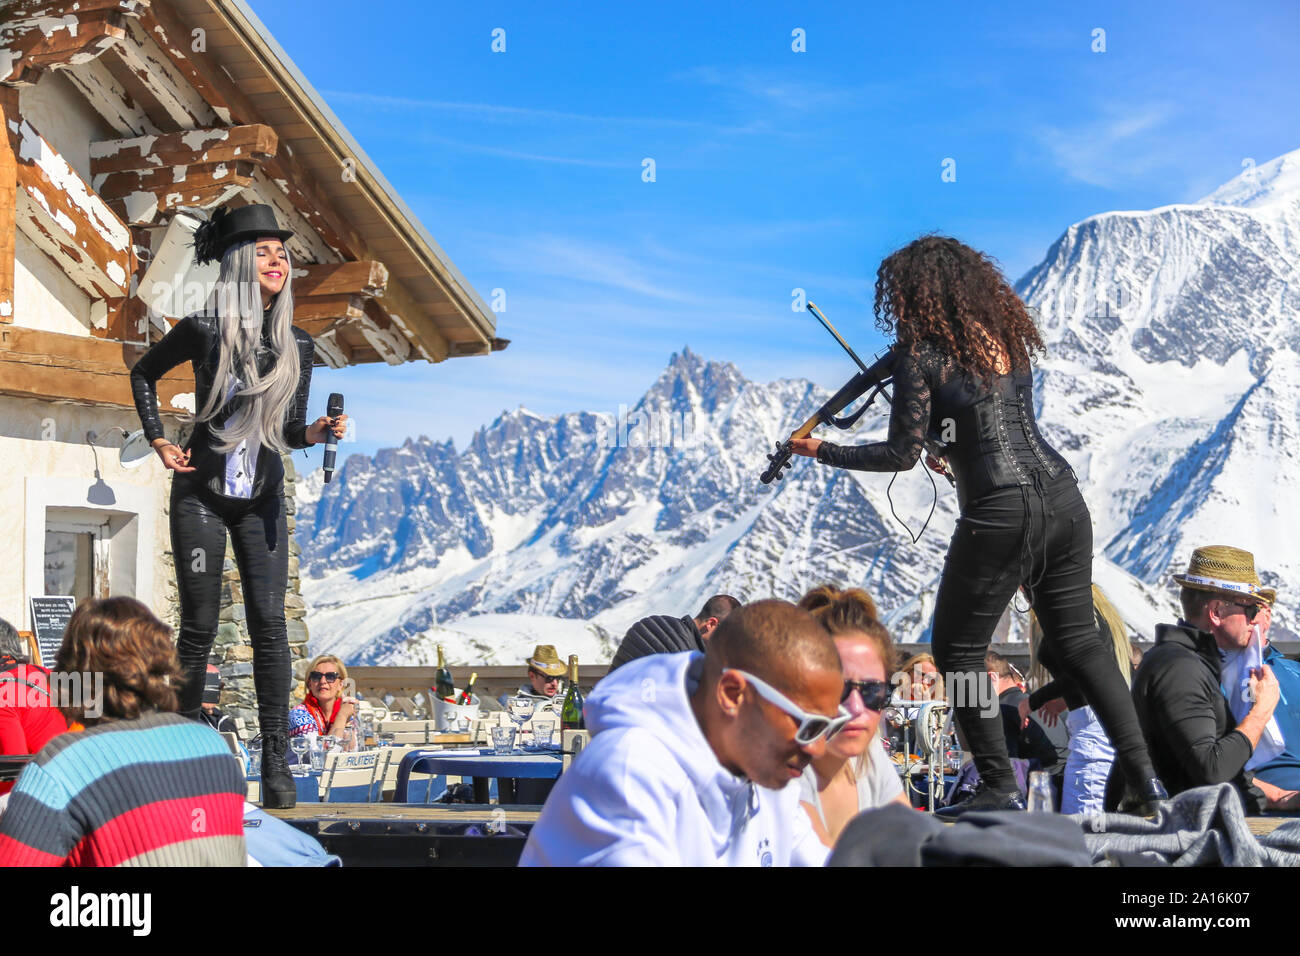 https://c8.alamy.com/comp/2A16K07/artists-perform-in-an-after-ski-event-with-snow-capped-mont-blanc-in-the-back-on-a-sunny-day-la-folie-douce-saint-gervais-restaurant-chamonix-2A16K07.jpg